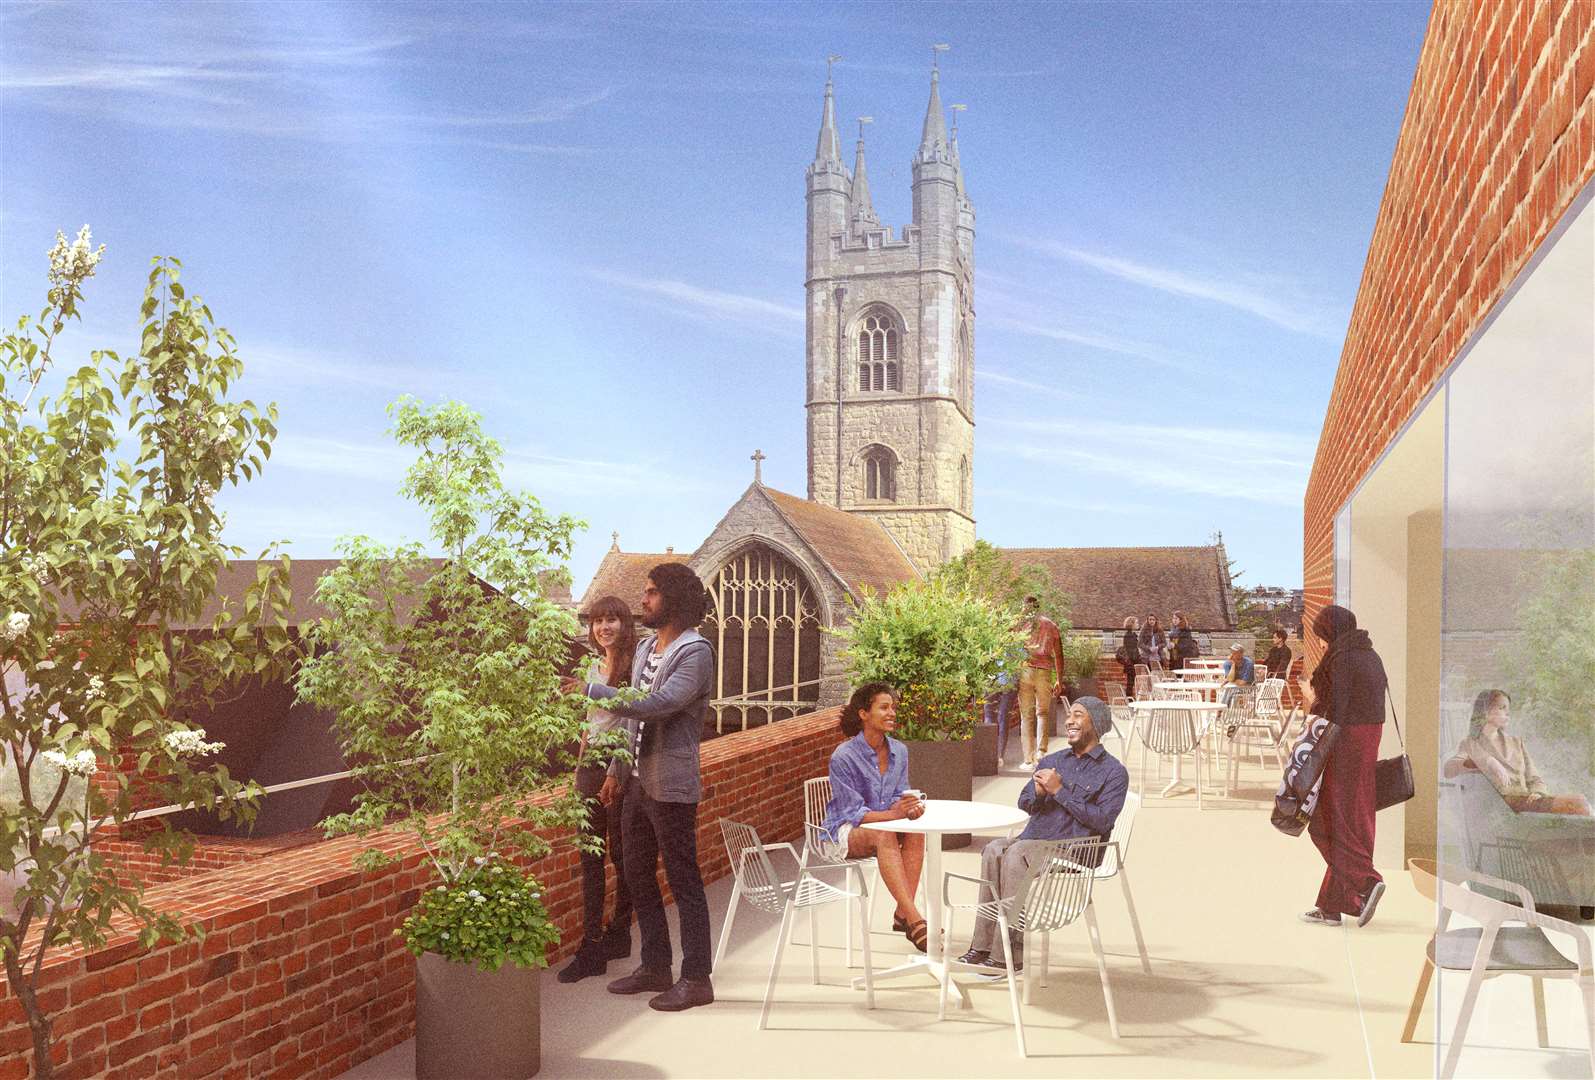 An artist's impression of Ashford Borough Council's plans for the site; the authority wants to knock down the rear of the bingo hall to open up views of St Mary's church. A public consultation was due to be held last summer but is yet to take place